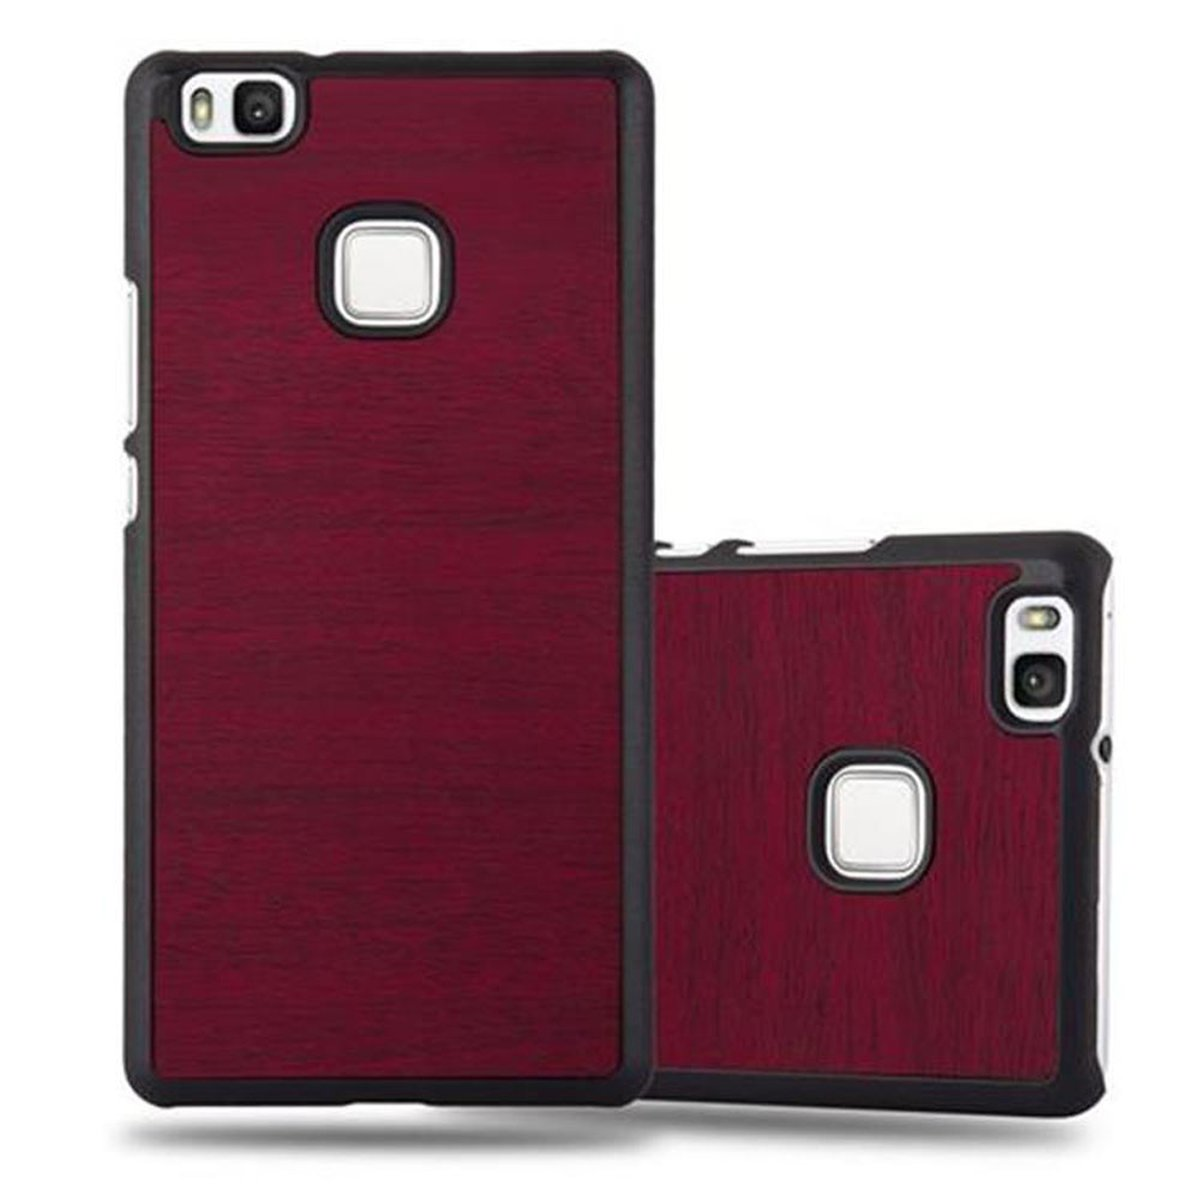 G9 LITE Huawei, / Hard Woody CADORABO Backcover, ROT LITE, 2016 WOODY Style, Case Hülle P9